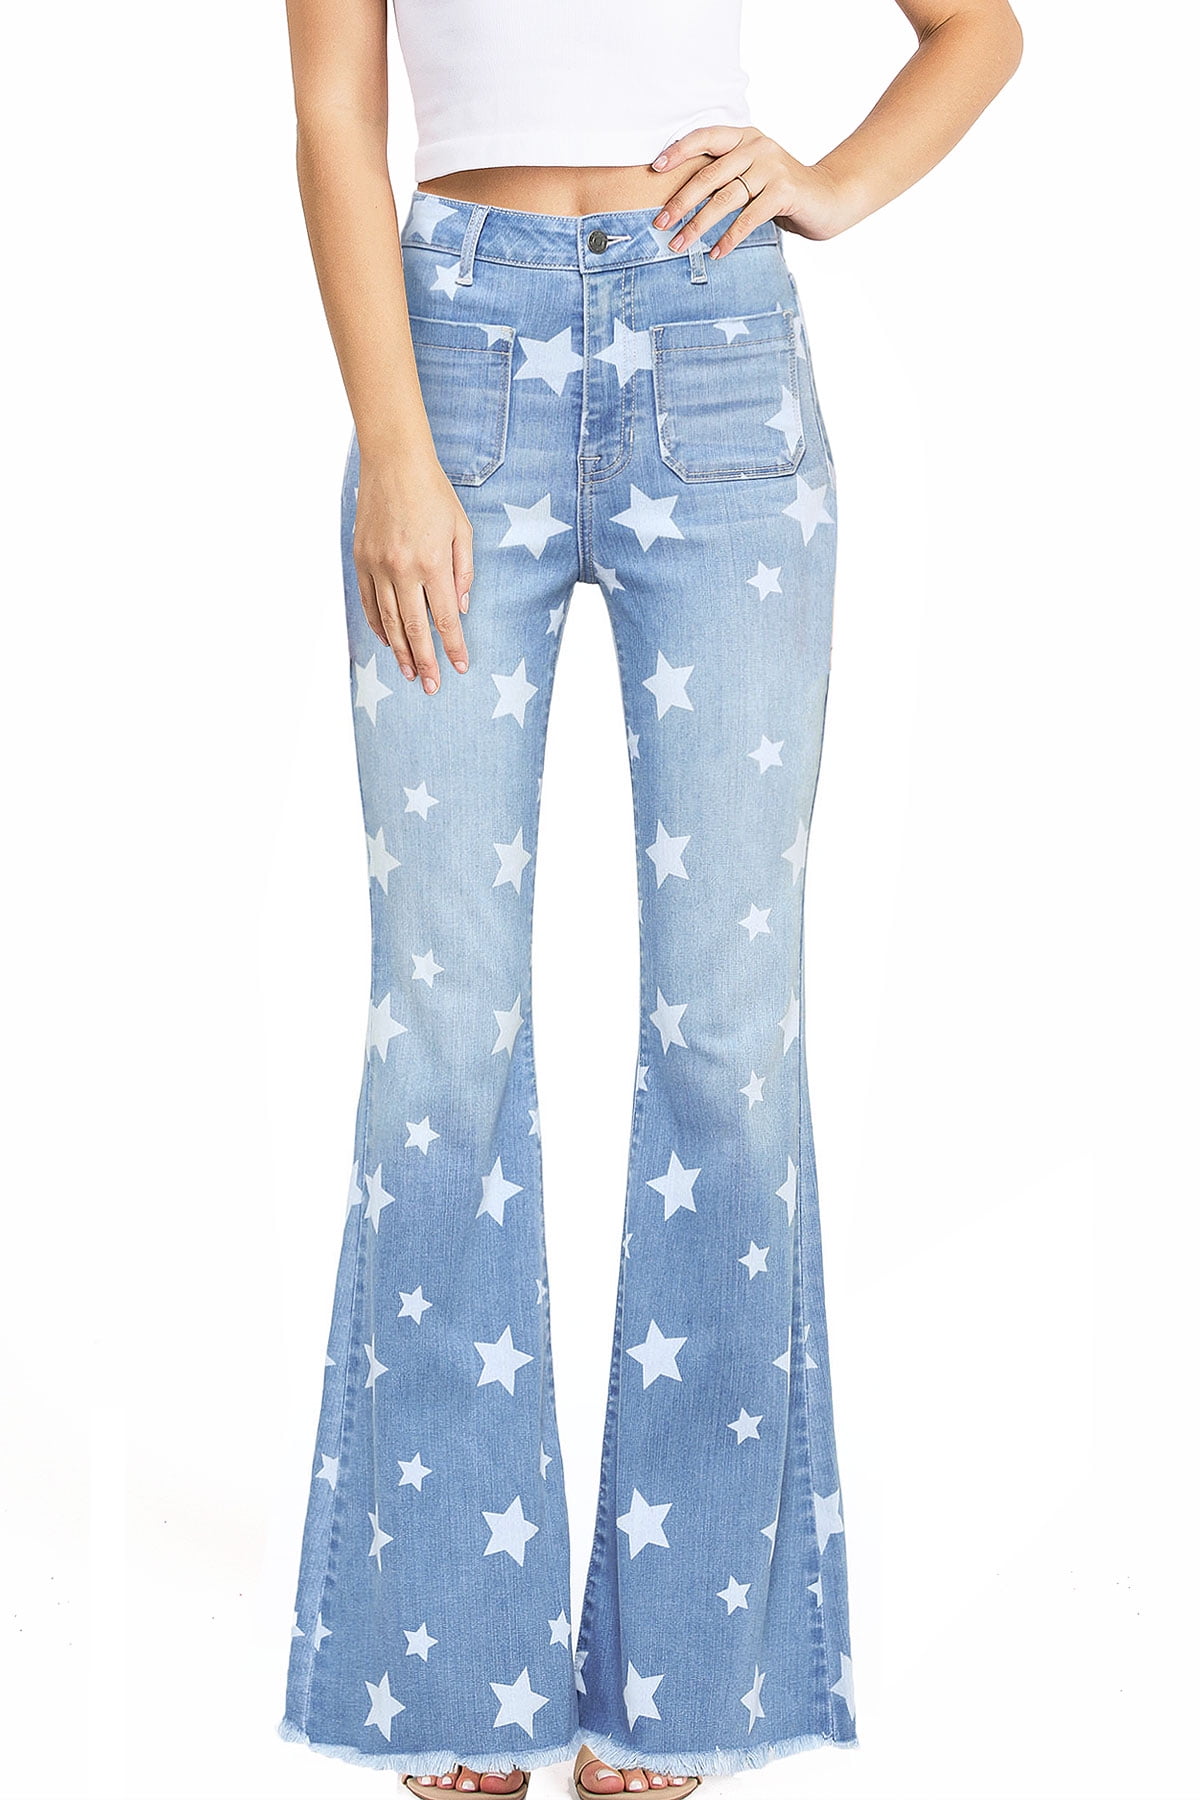 NEW WEST JEANS NAUTICAL STAR FLARE PANTS